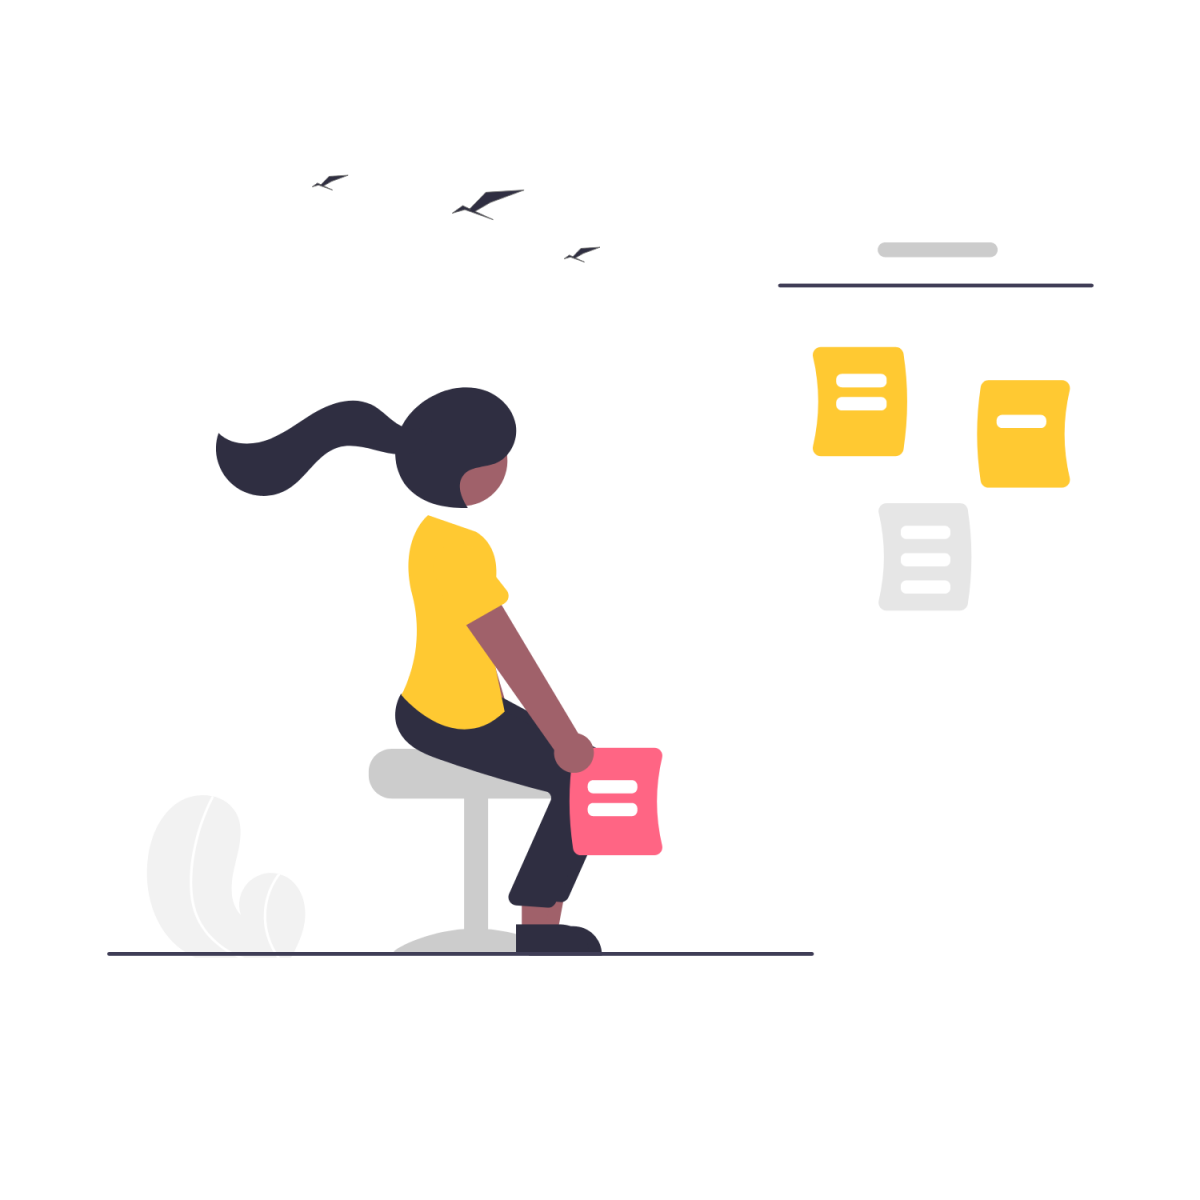 Freeicon.io illustrated image of woman sitting with several papers floating in front of her